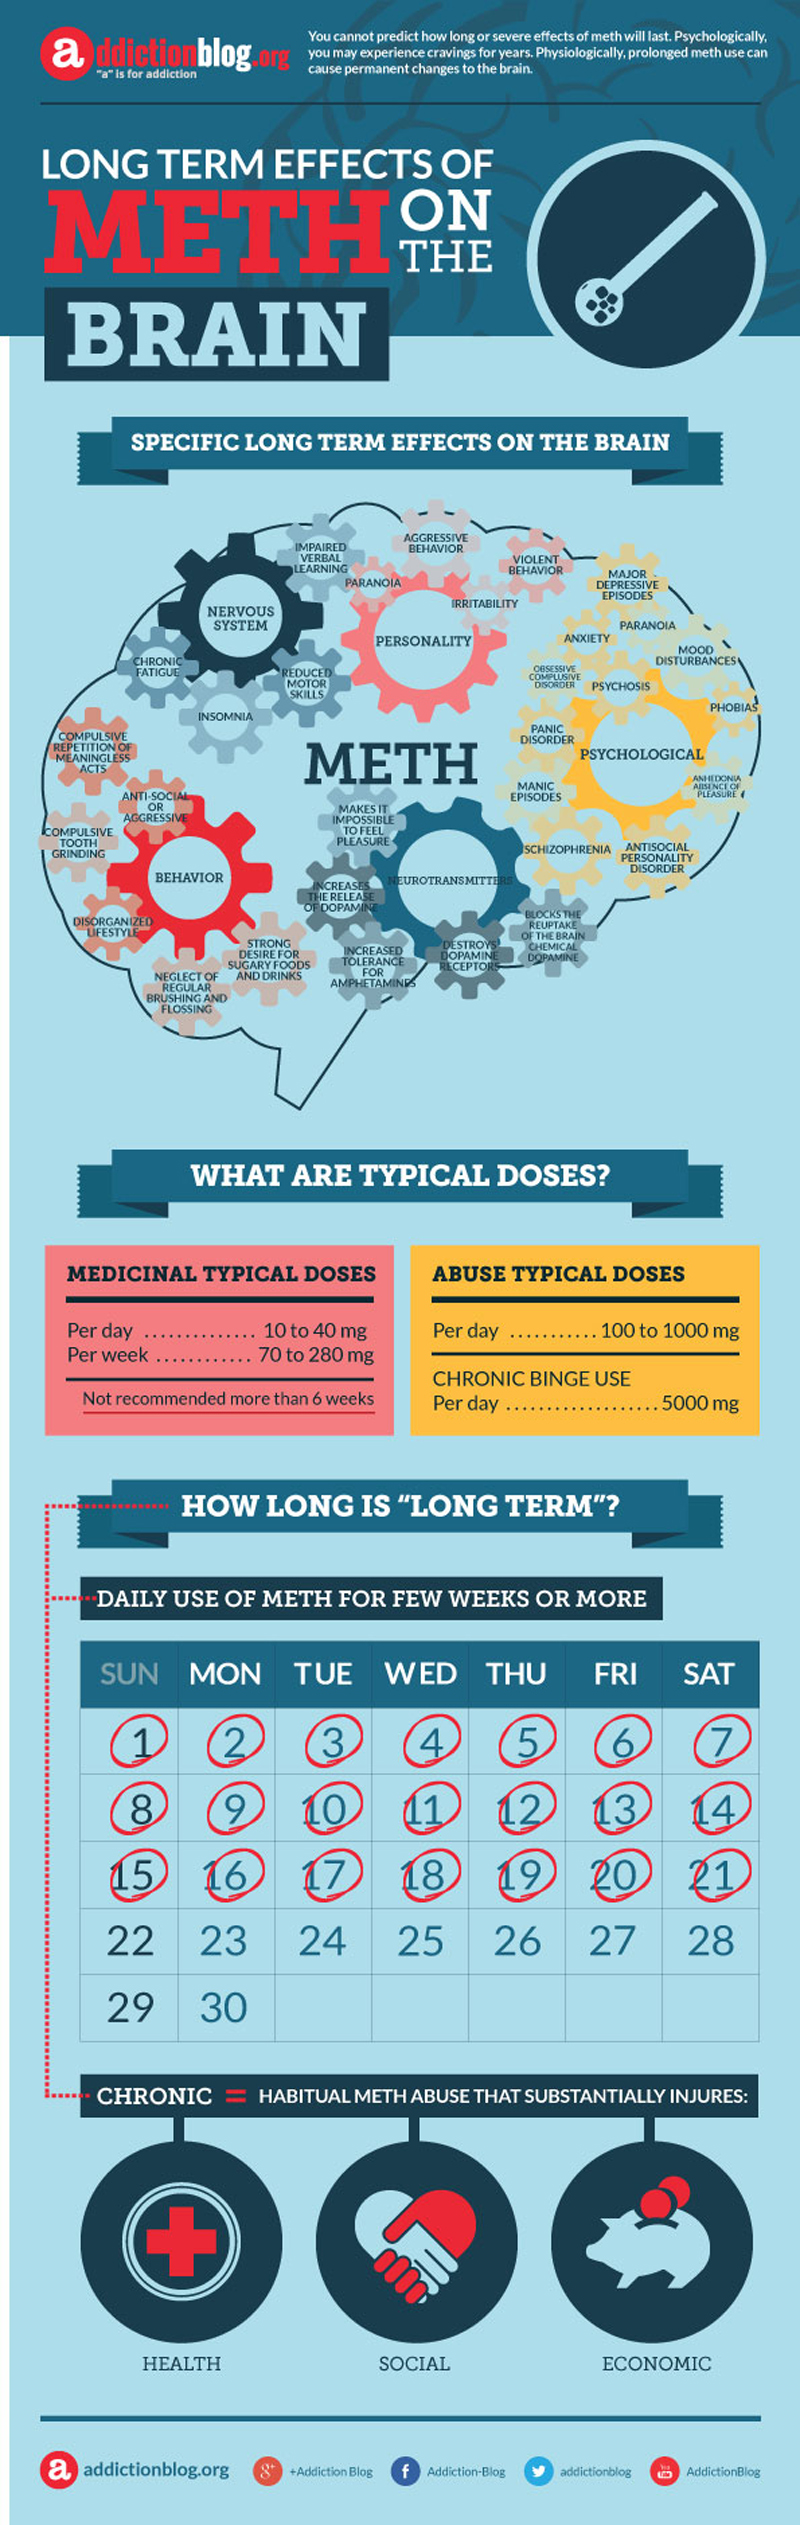 Long term effects of meth on the brain (INFOGRAPHIC)